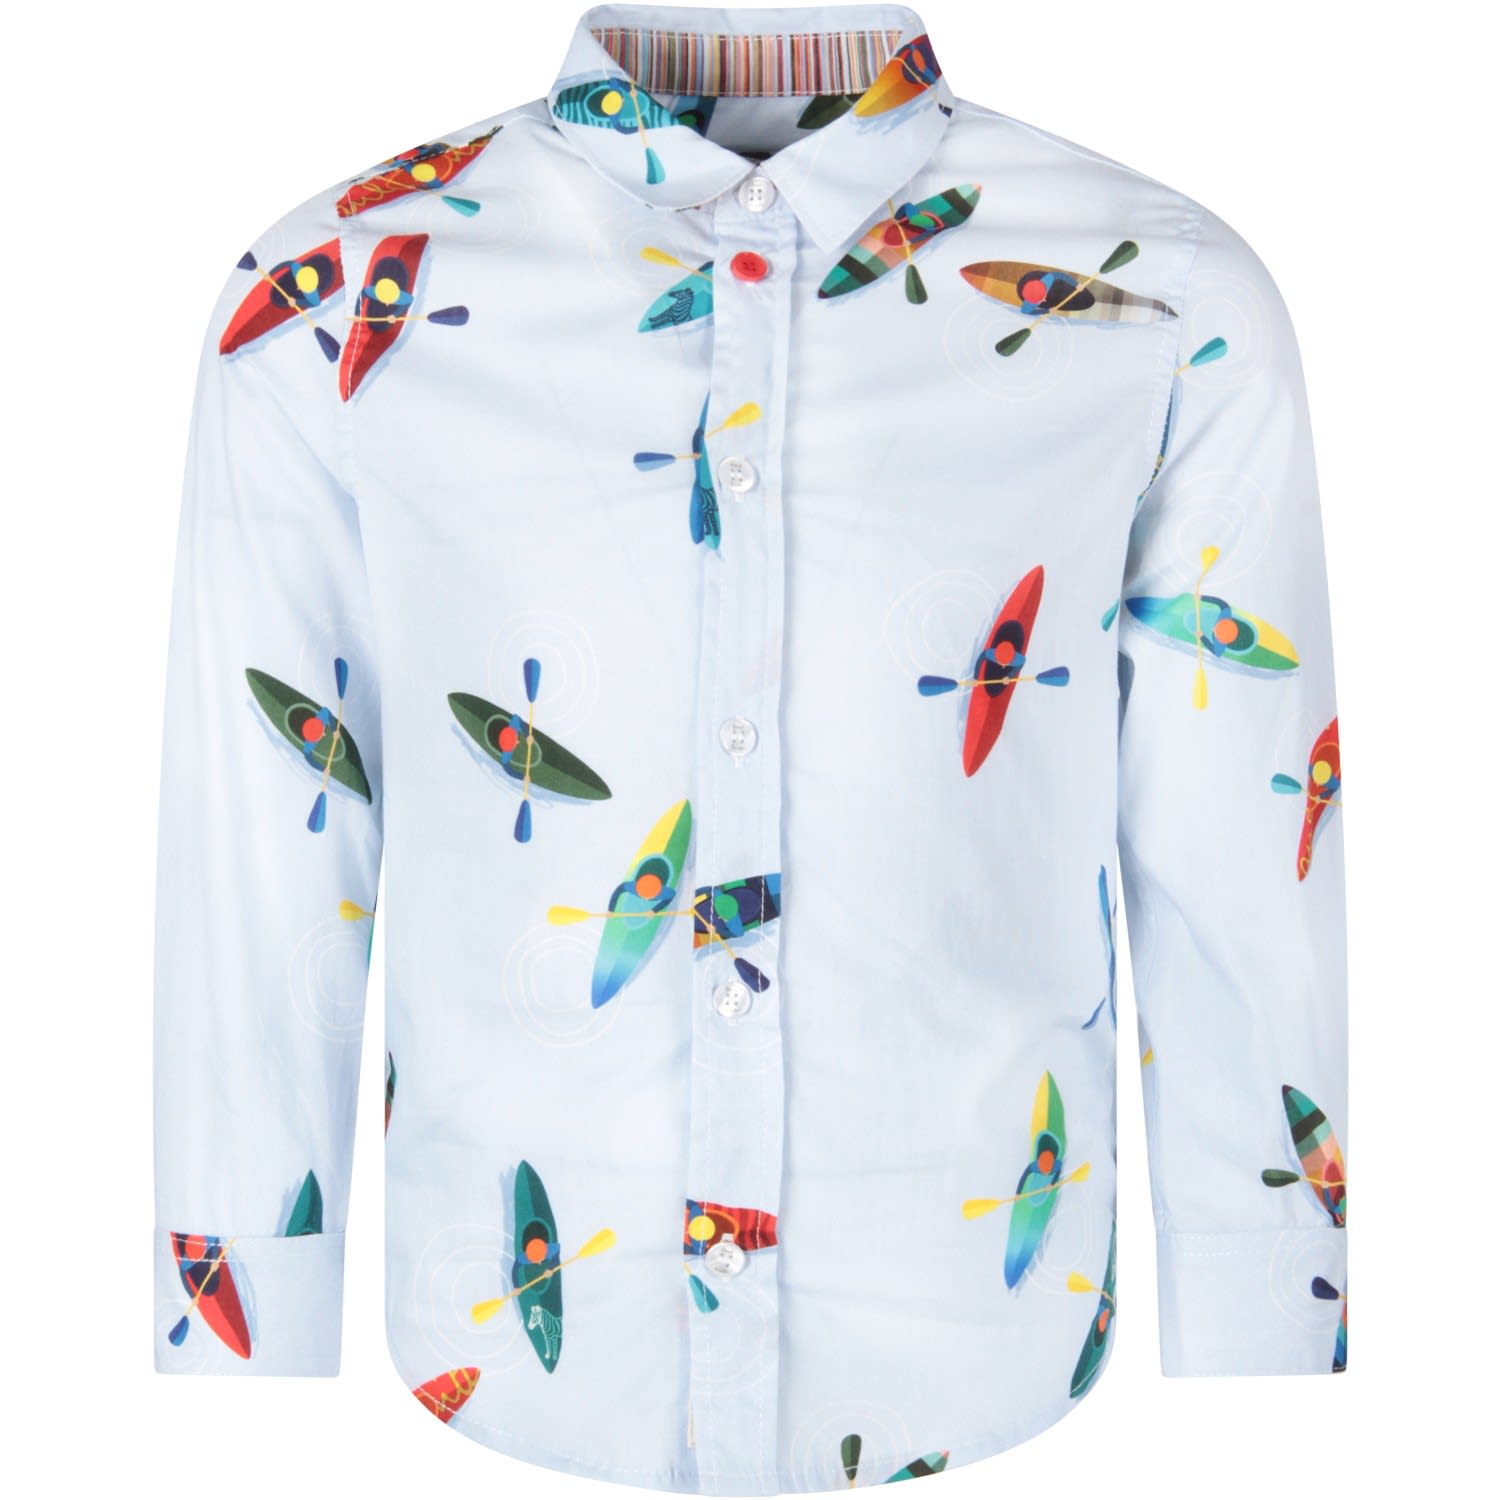 PAUL SMITH JUNIOR LIGHT BLUE SHIRT FOR BOY WITH COLORFUL PRINTS,11271632